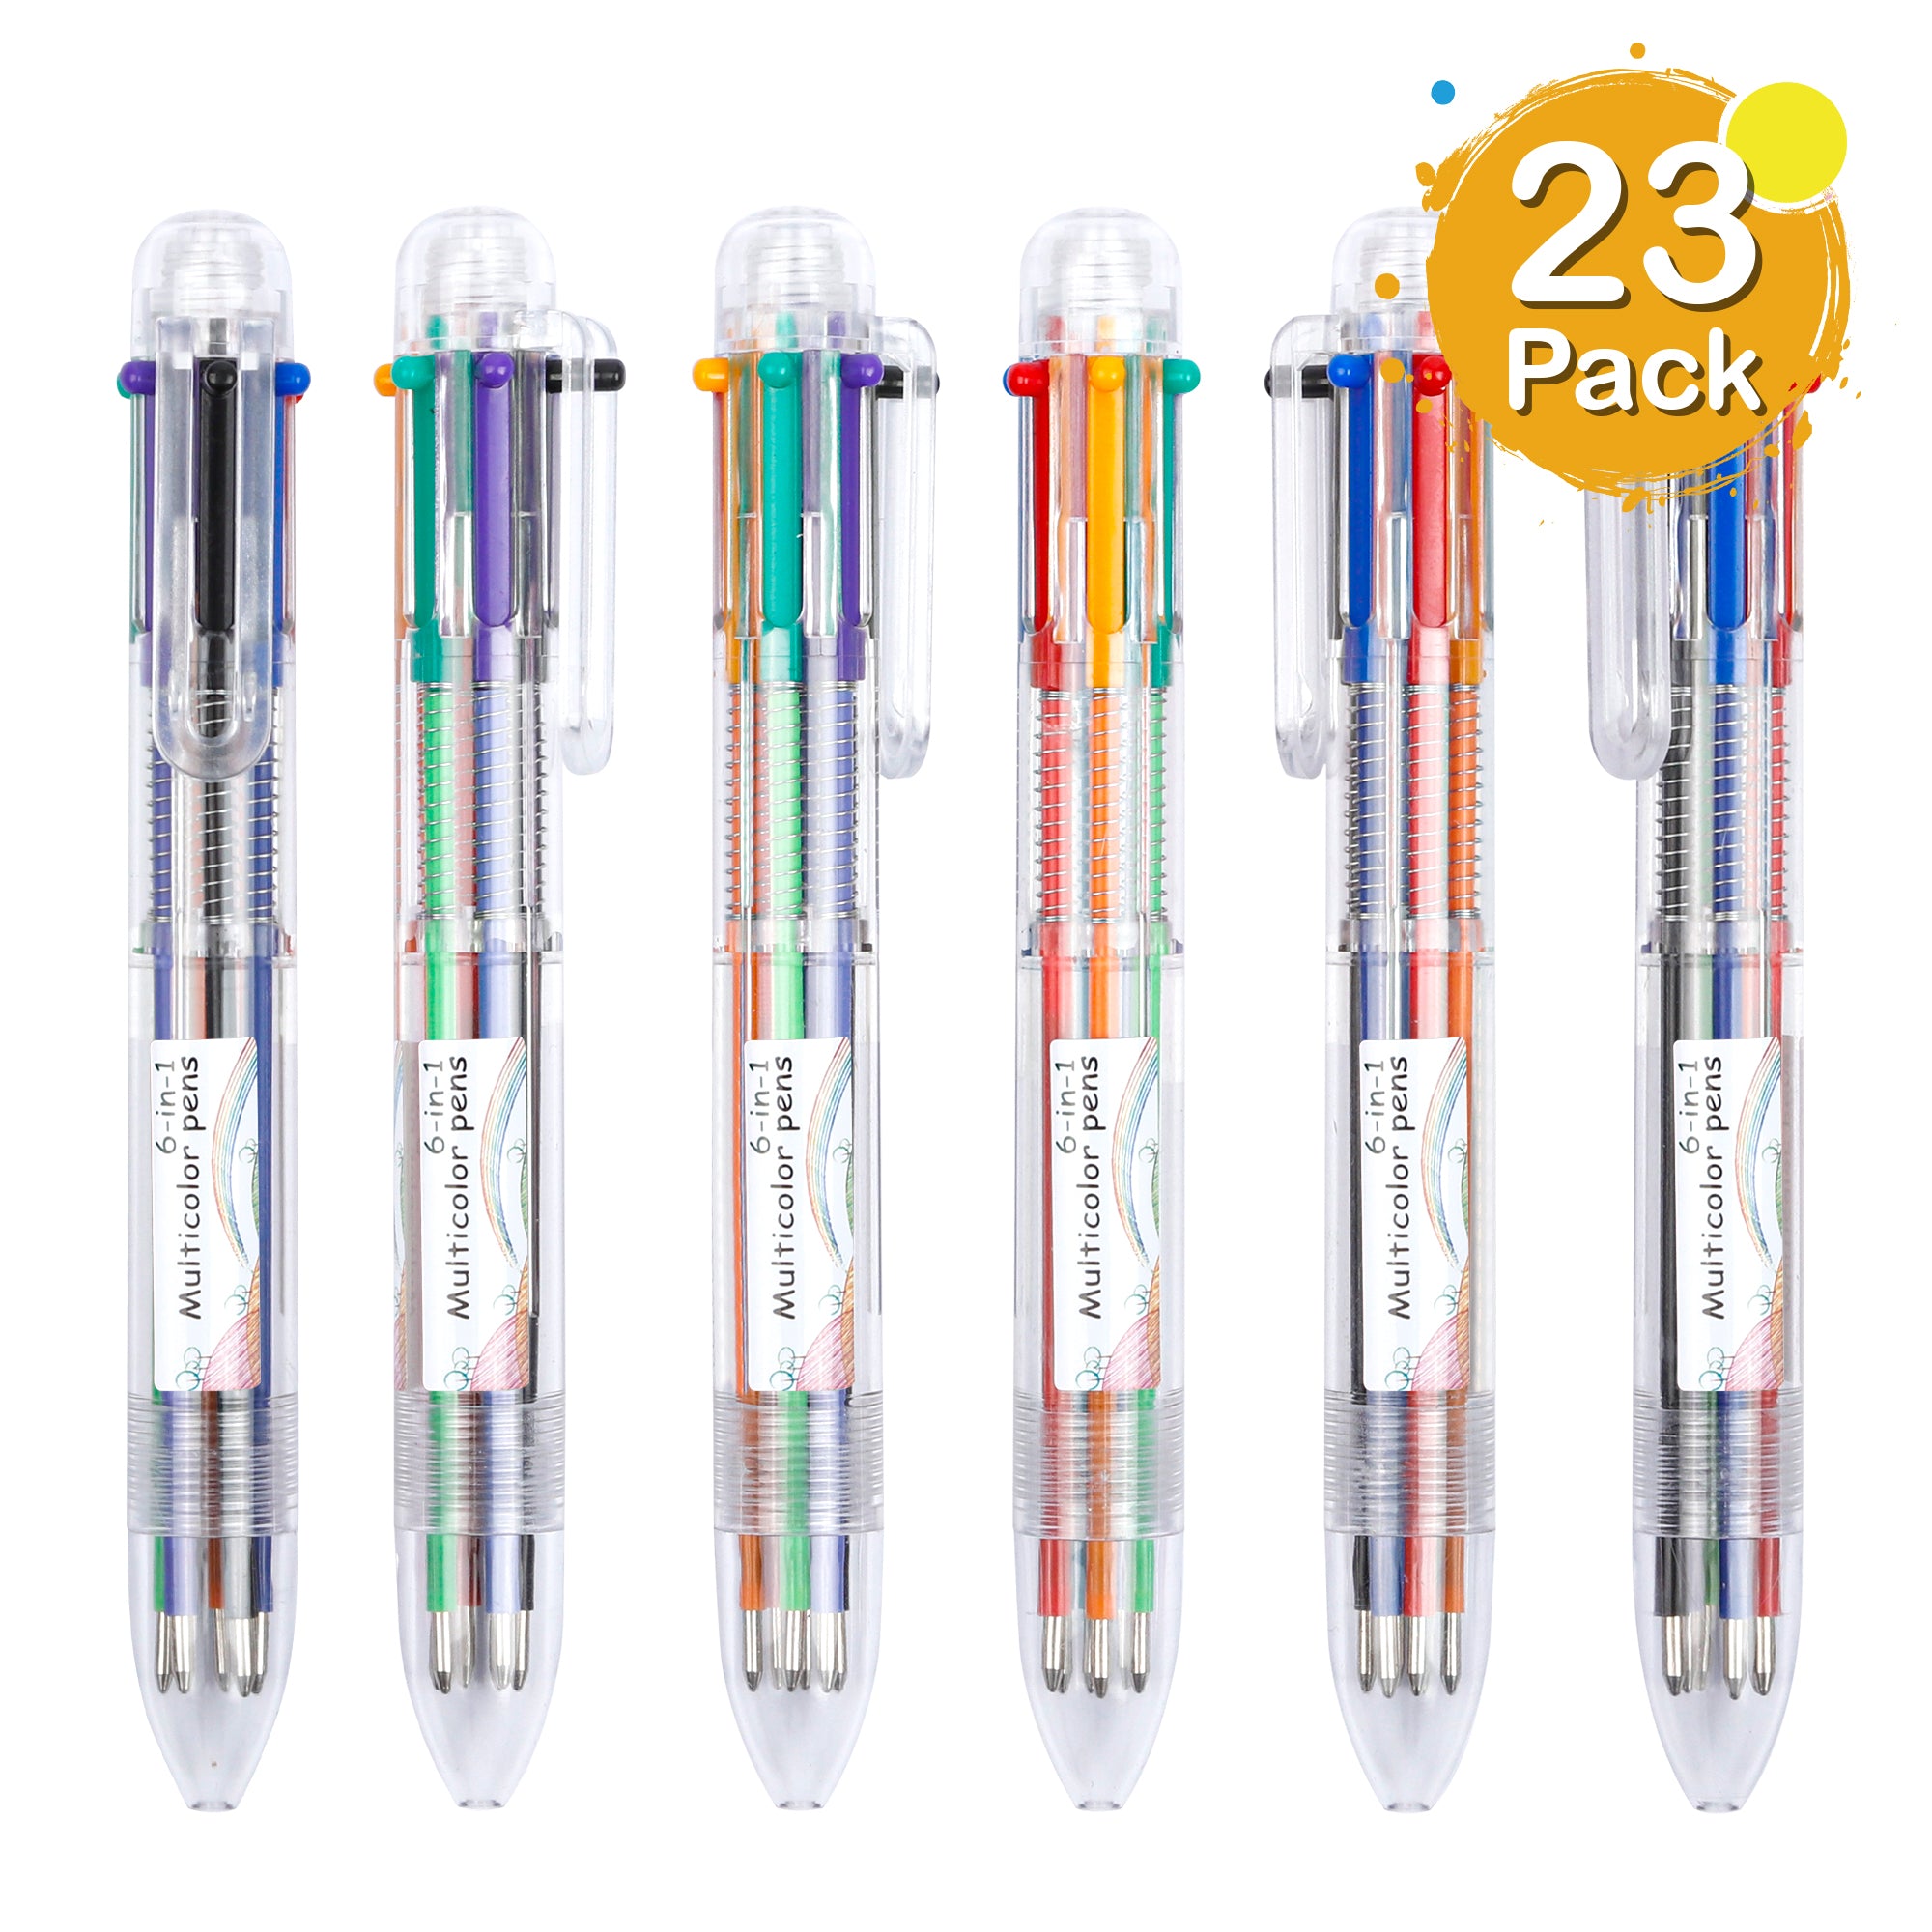  Hutou 6 Pack 0.5mm 6-in-1 Multicolor Ballpoint Pen 6